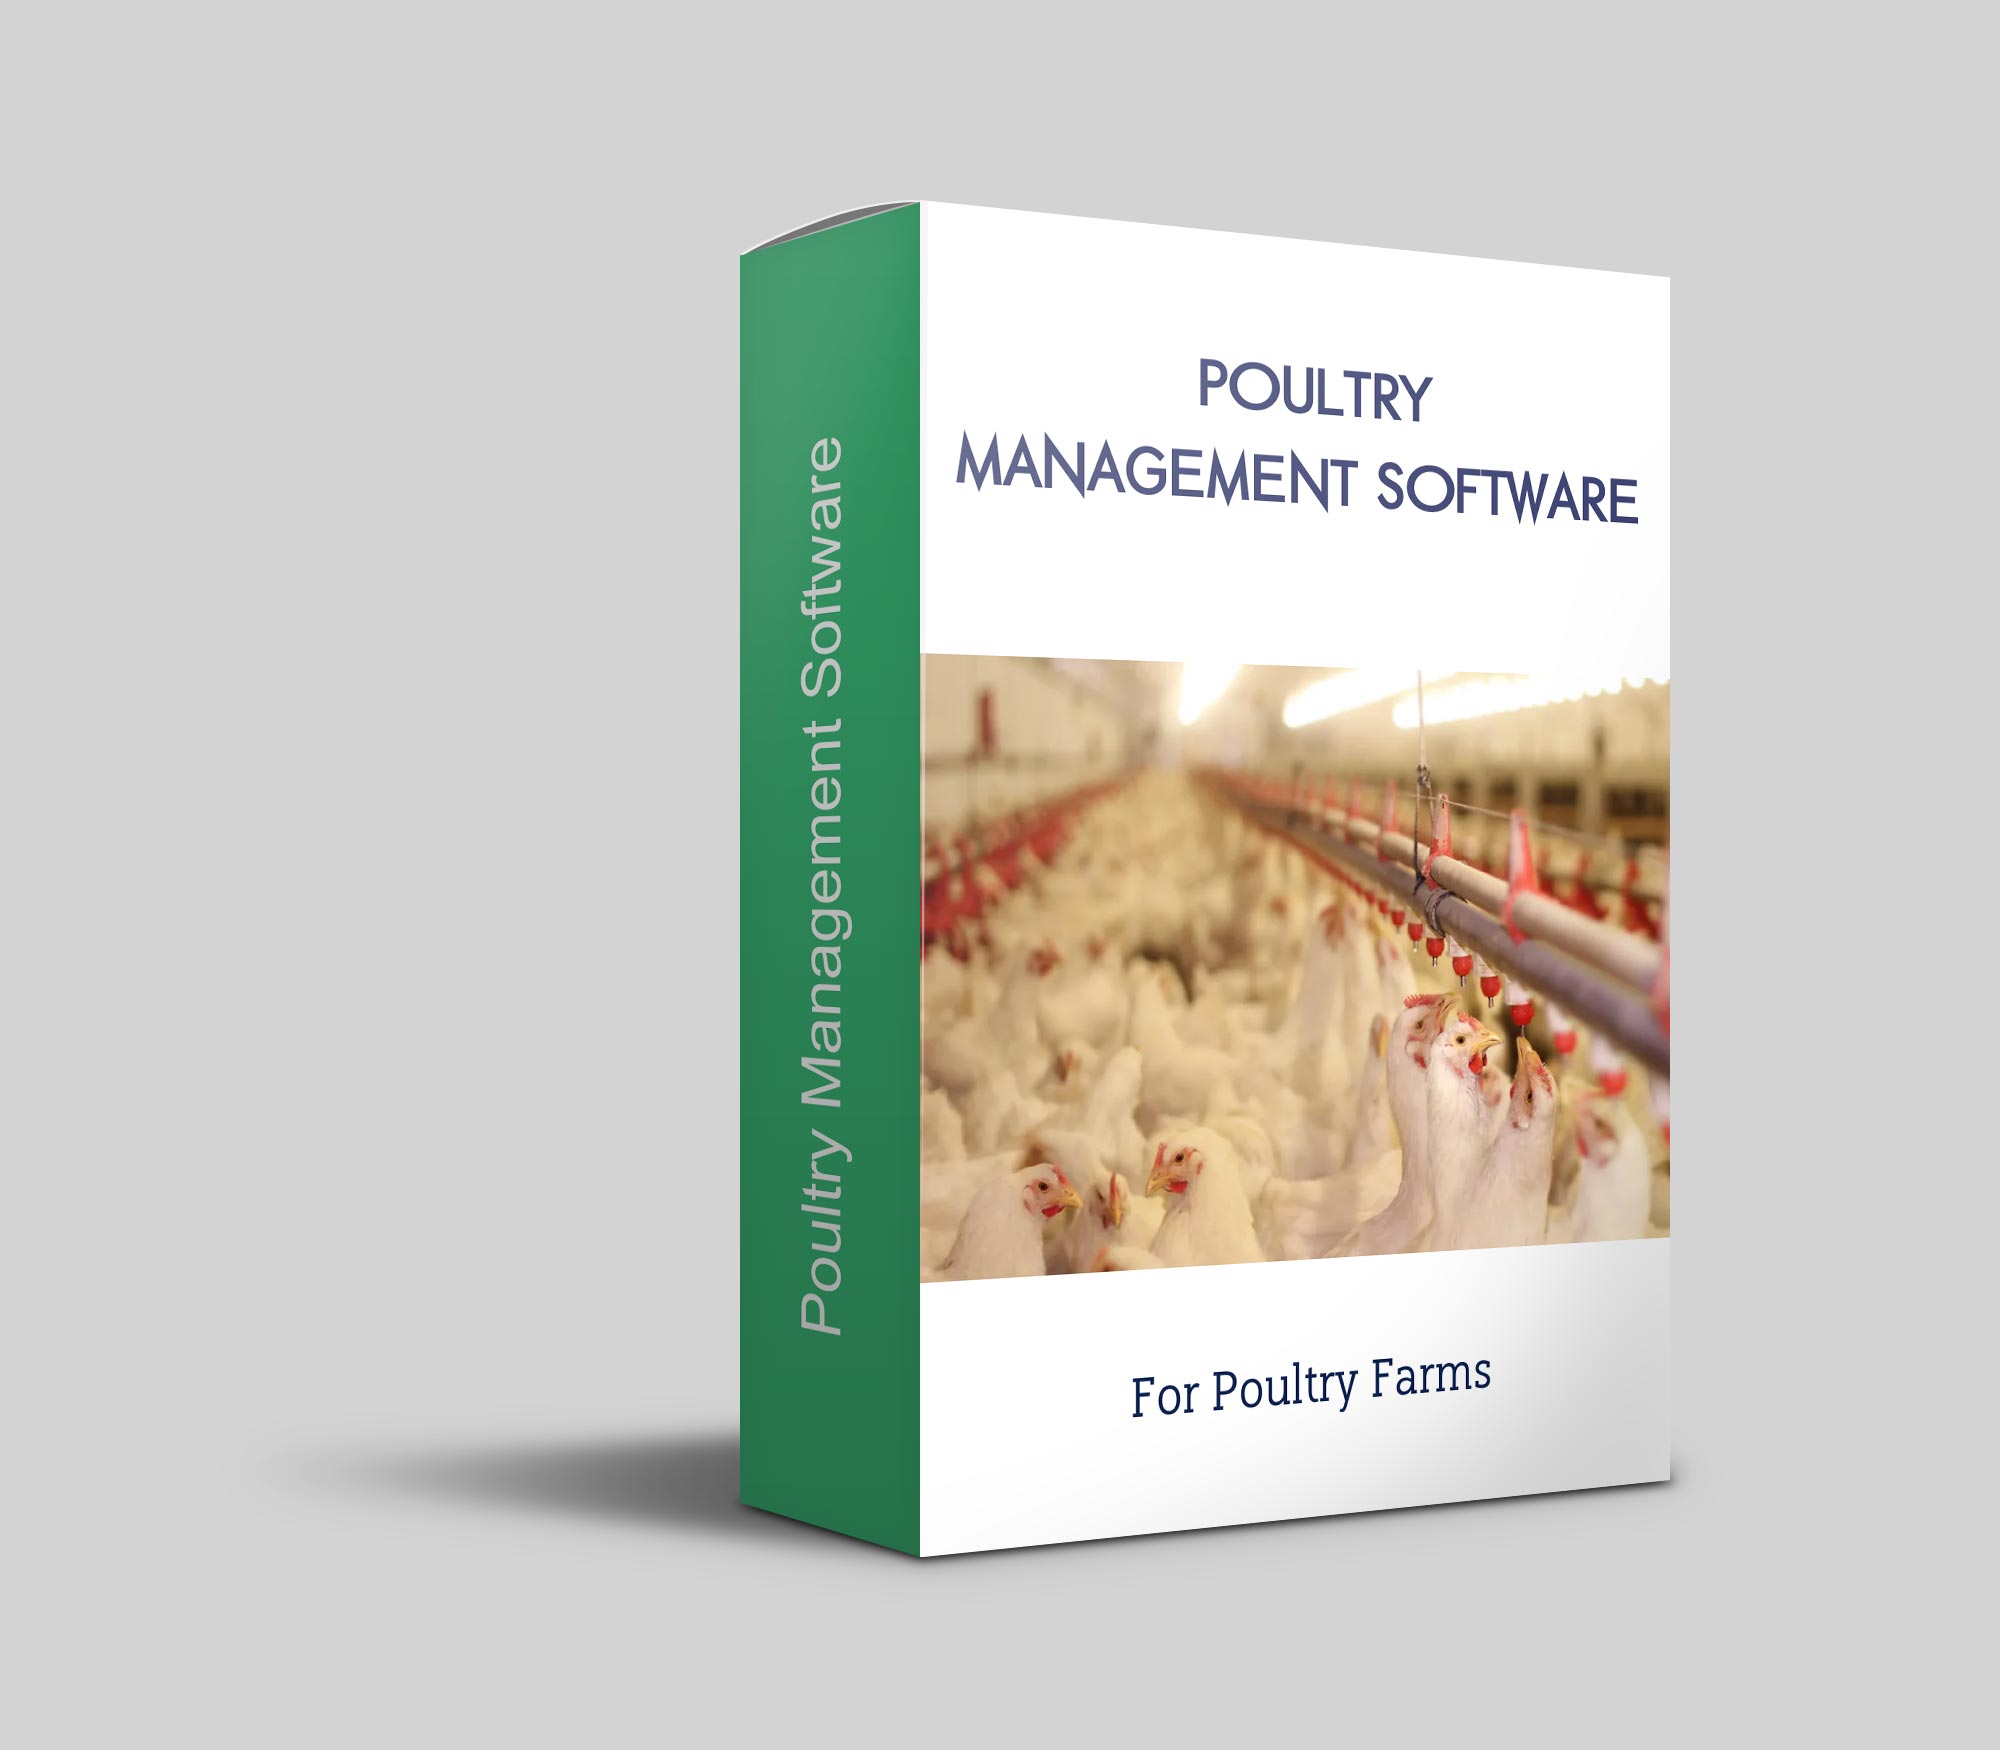 Poultry Management Software